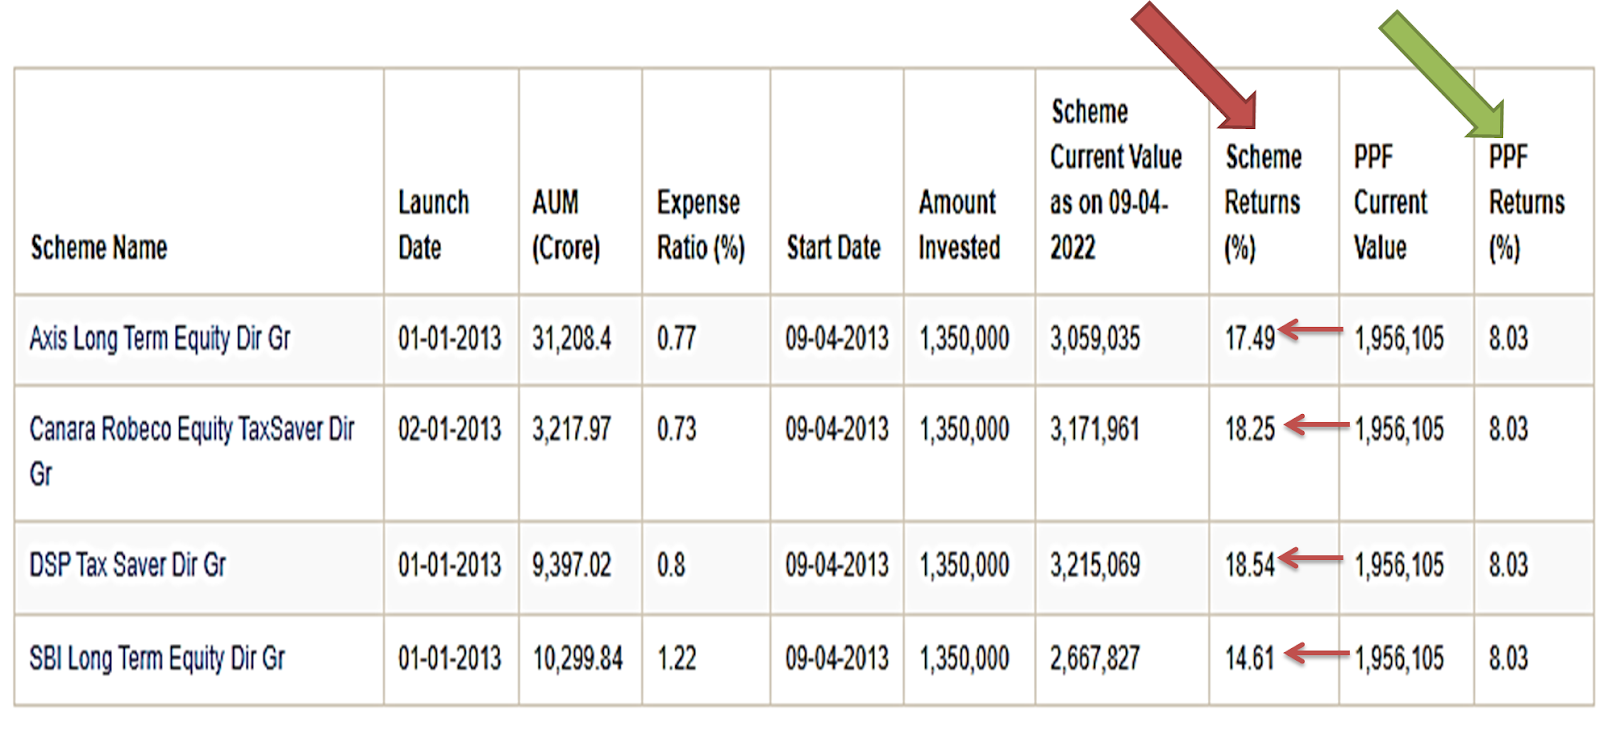 This image compares the performance of four ELSS funds Vs PPF in SIP investment mode for the period 2013-2022